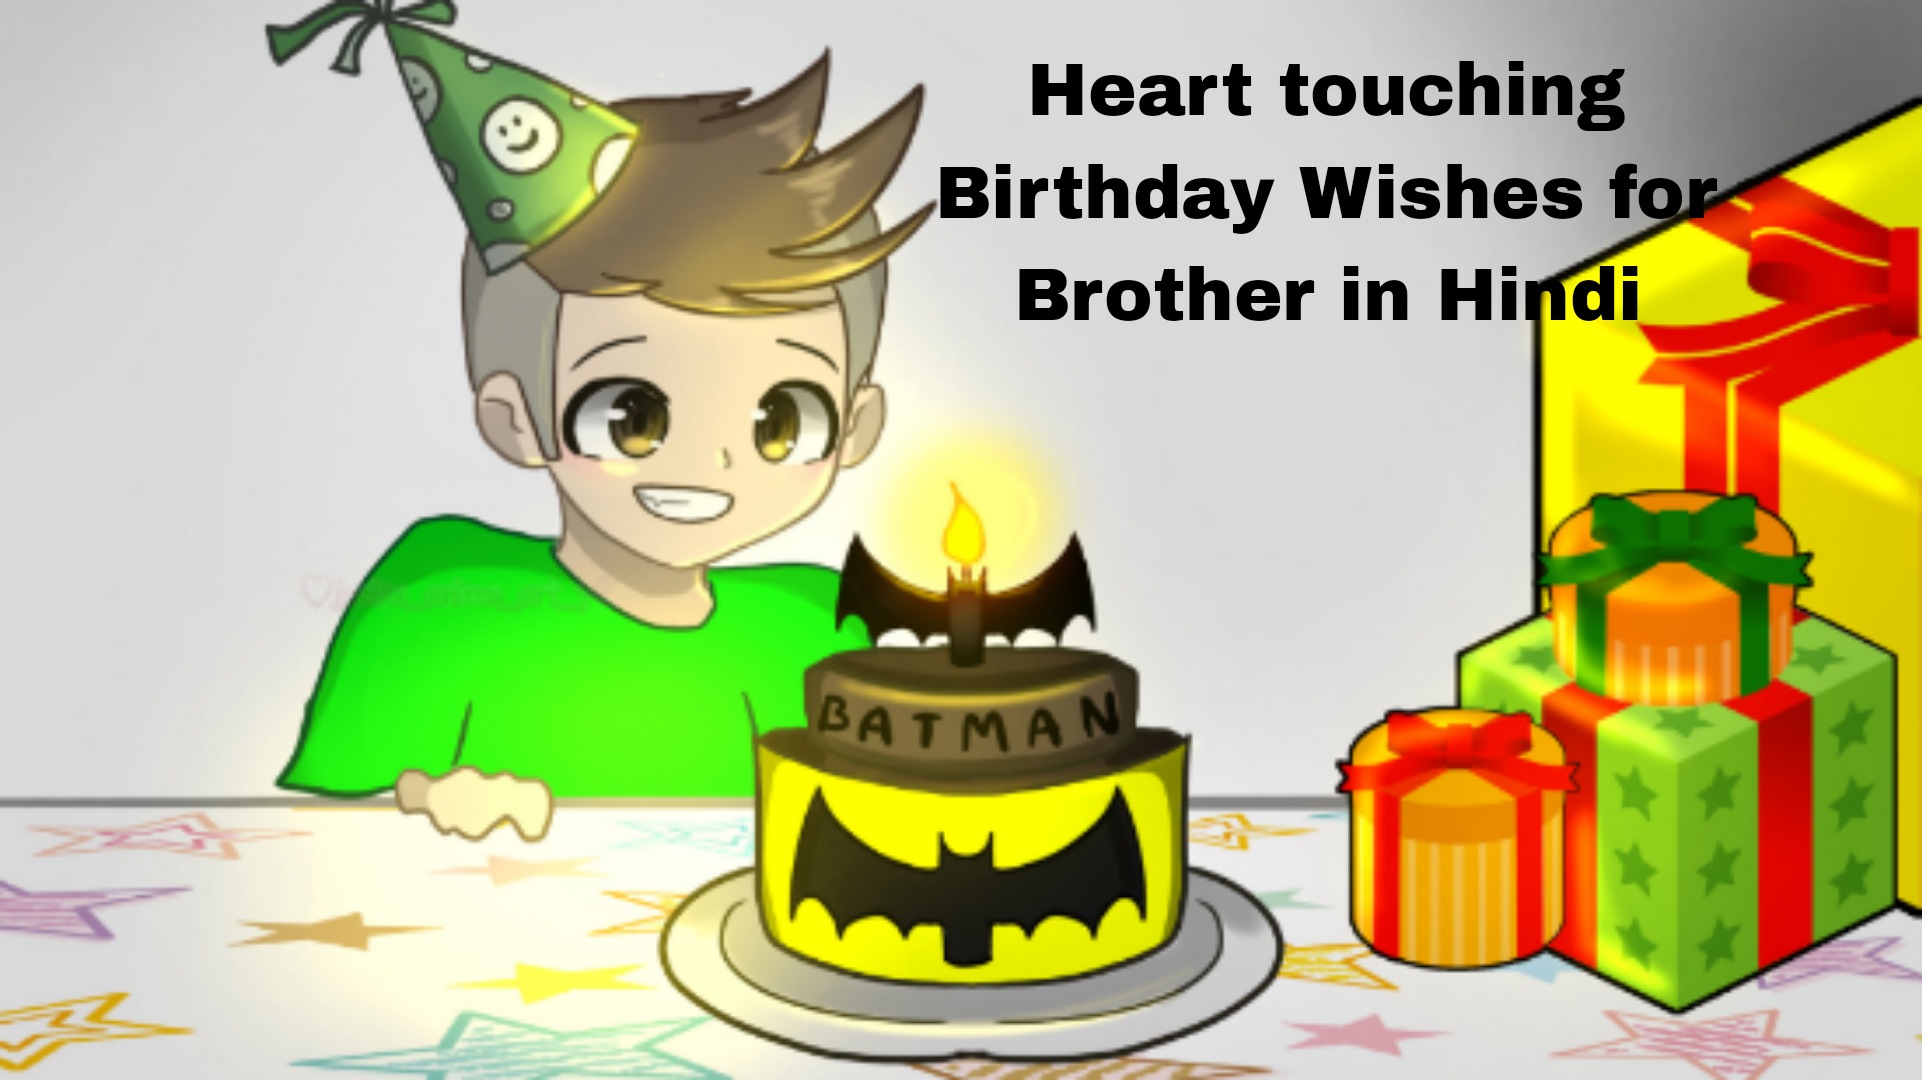 125+ Heart touching Birthday Wishes for Brother in Hindi